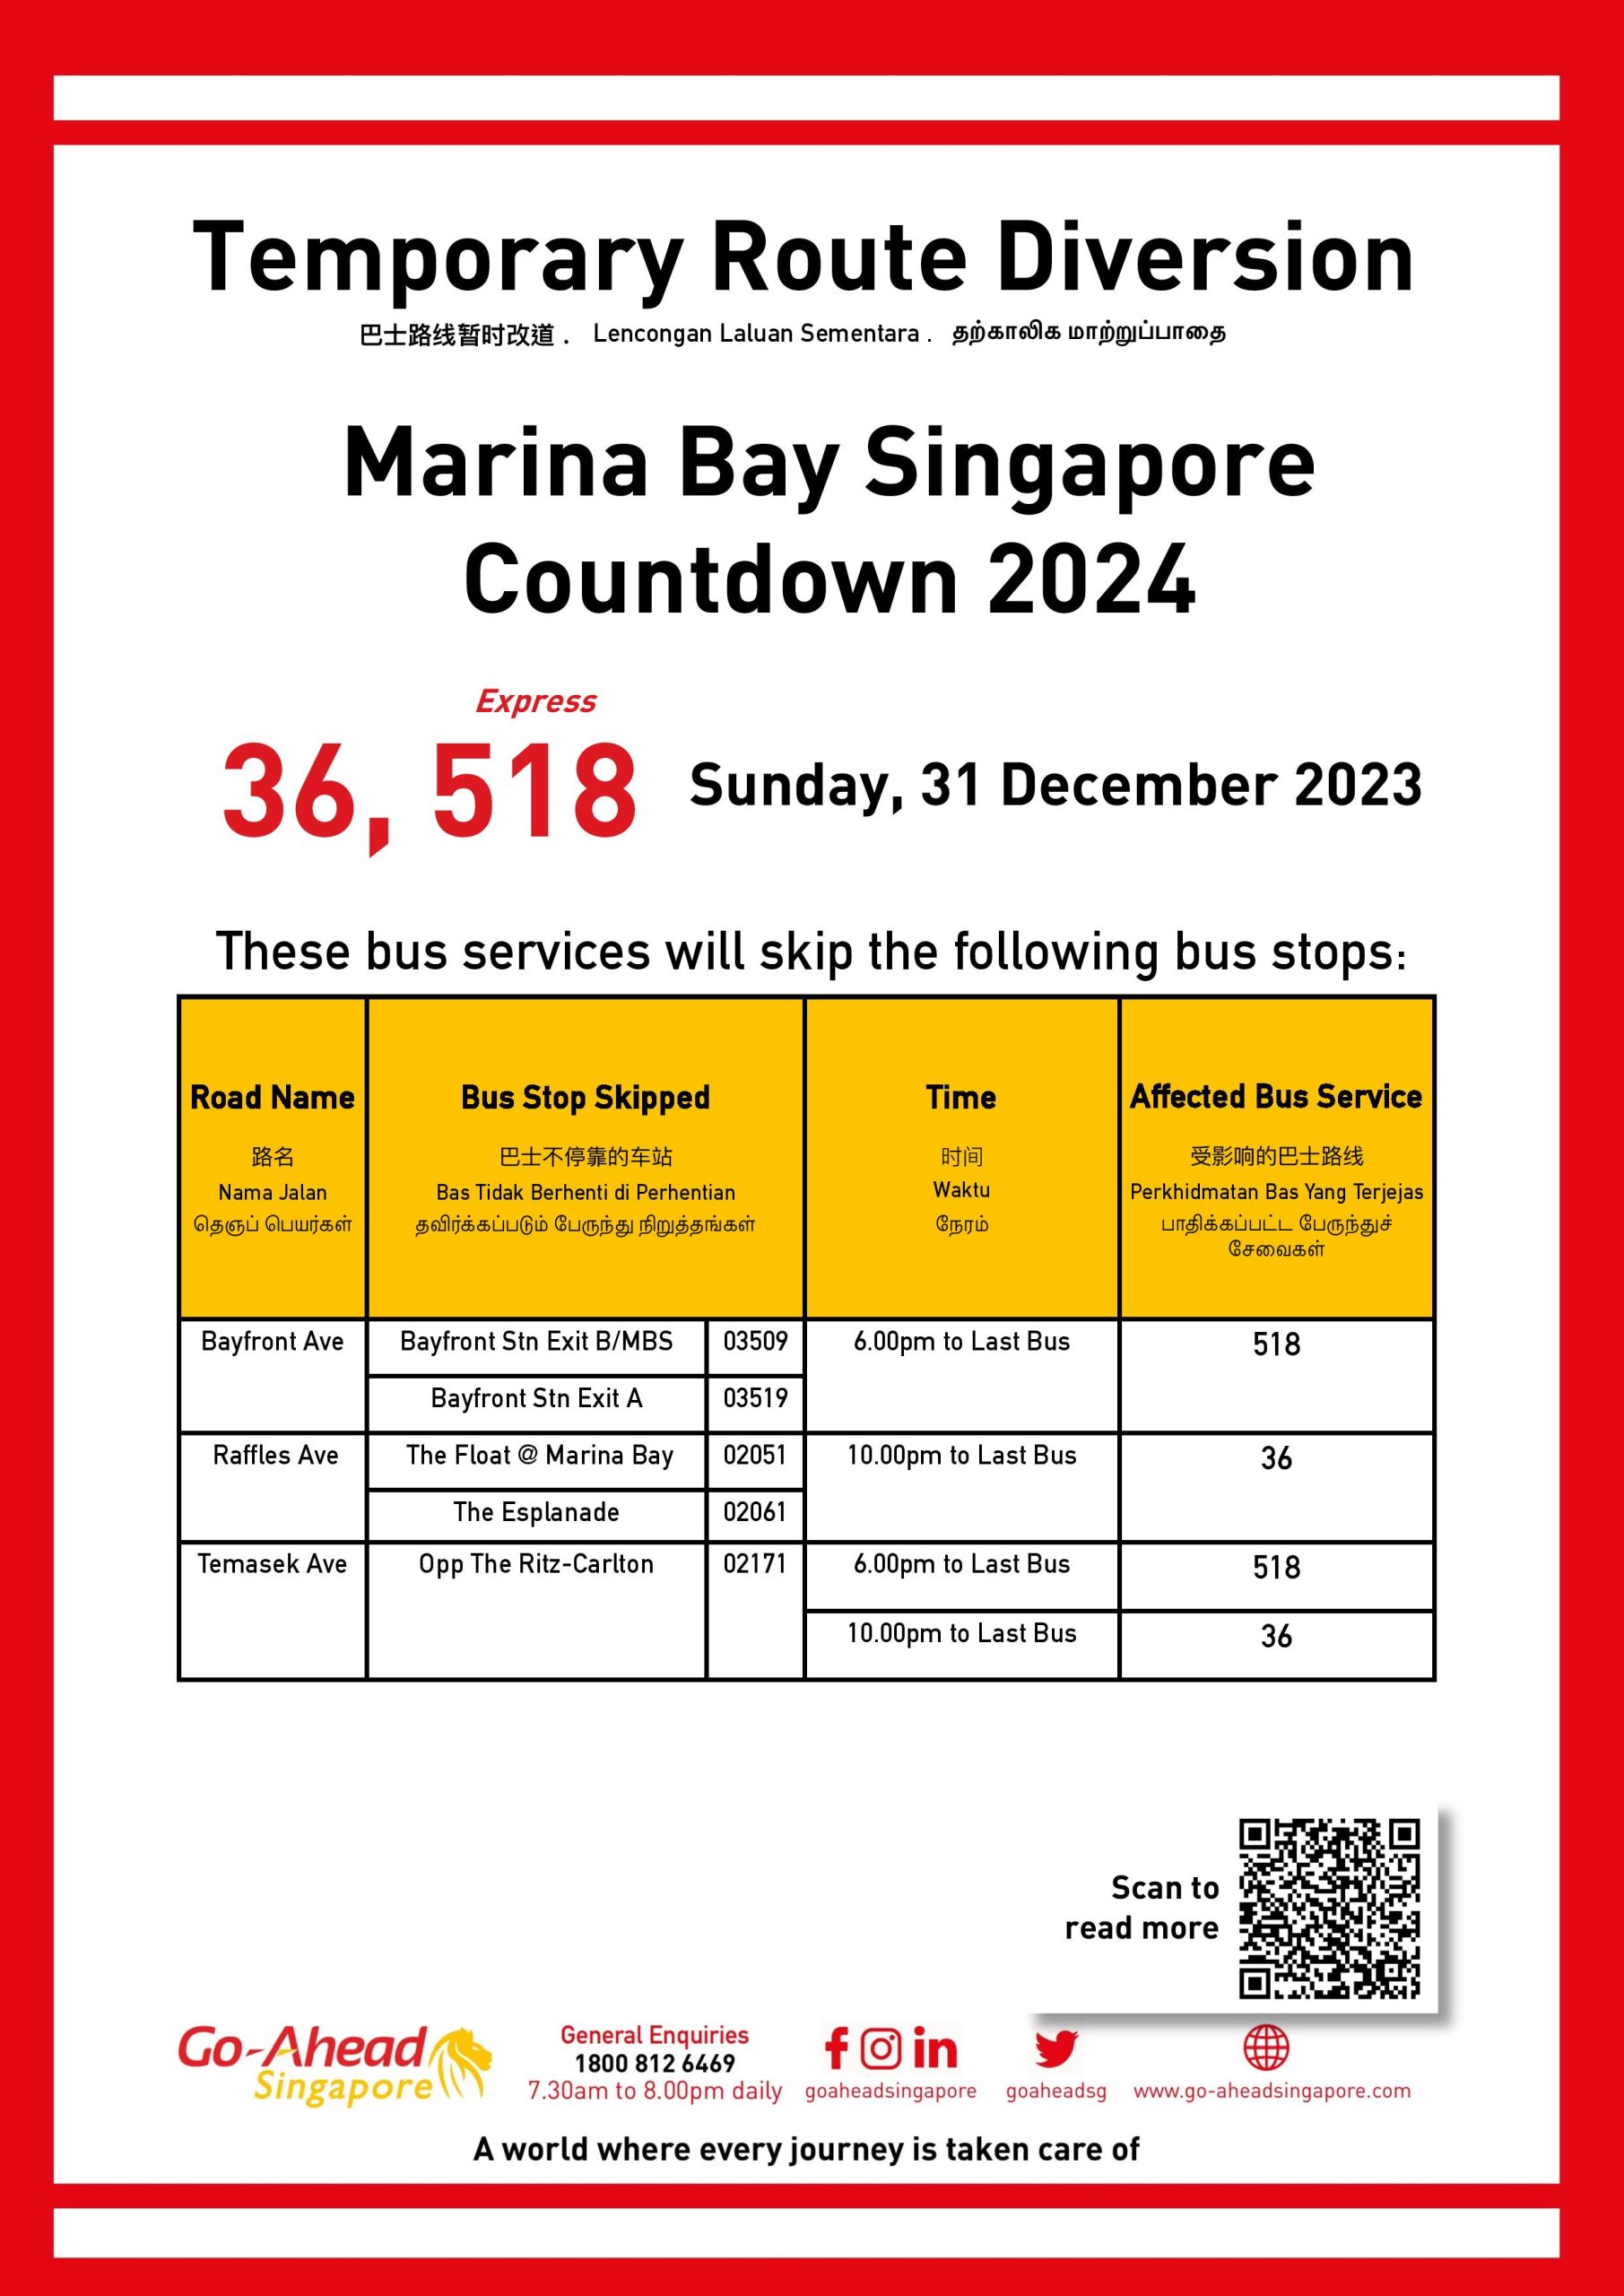 GoAhead Singapore Temporary Route Diversion Poster for Marina Bay